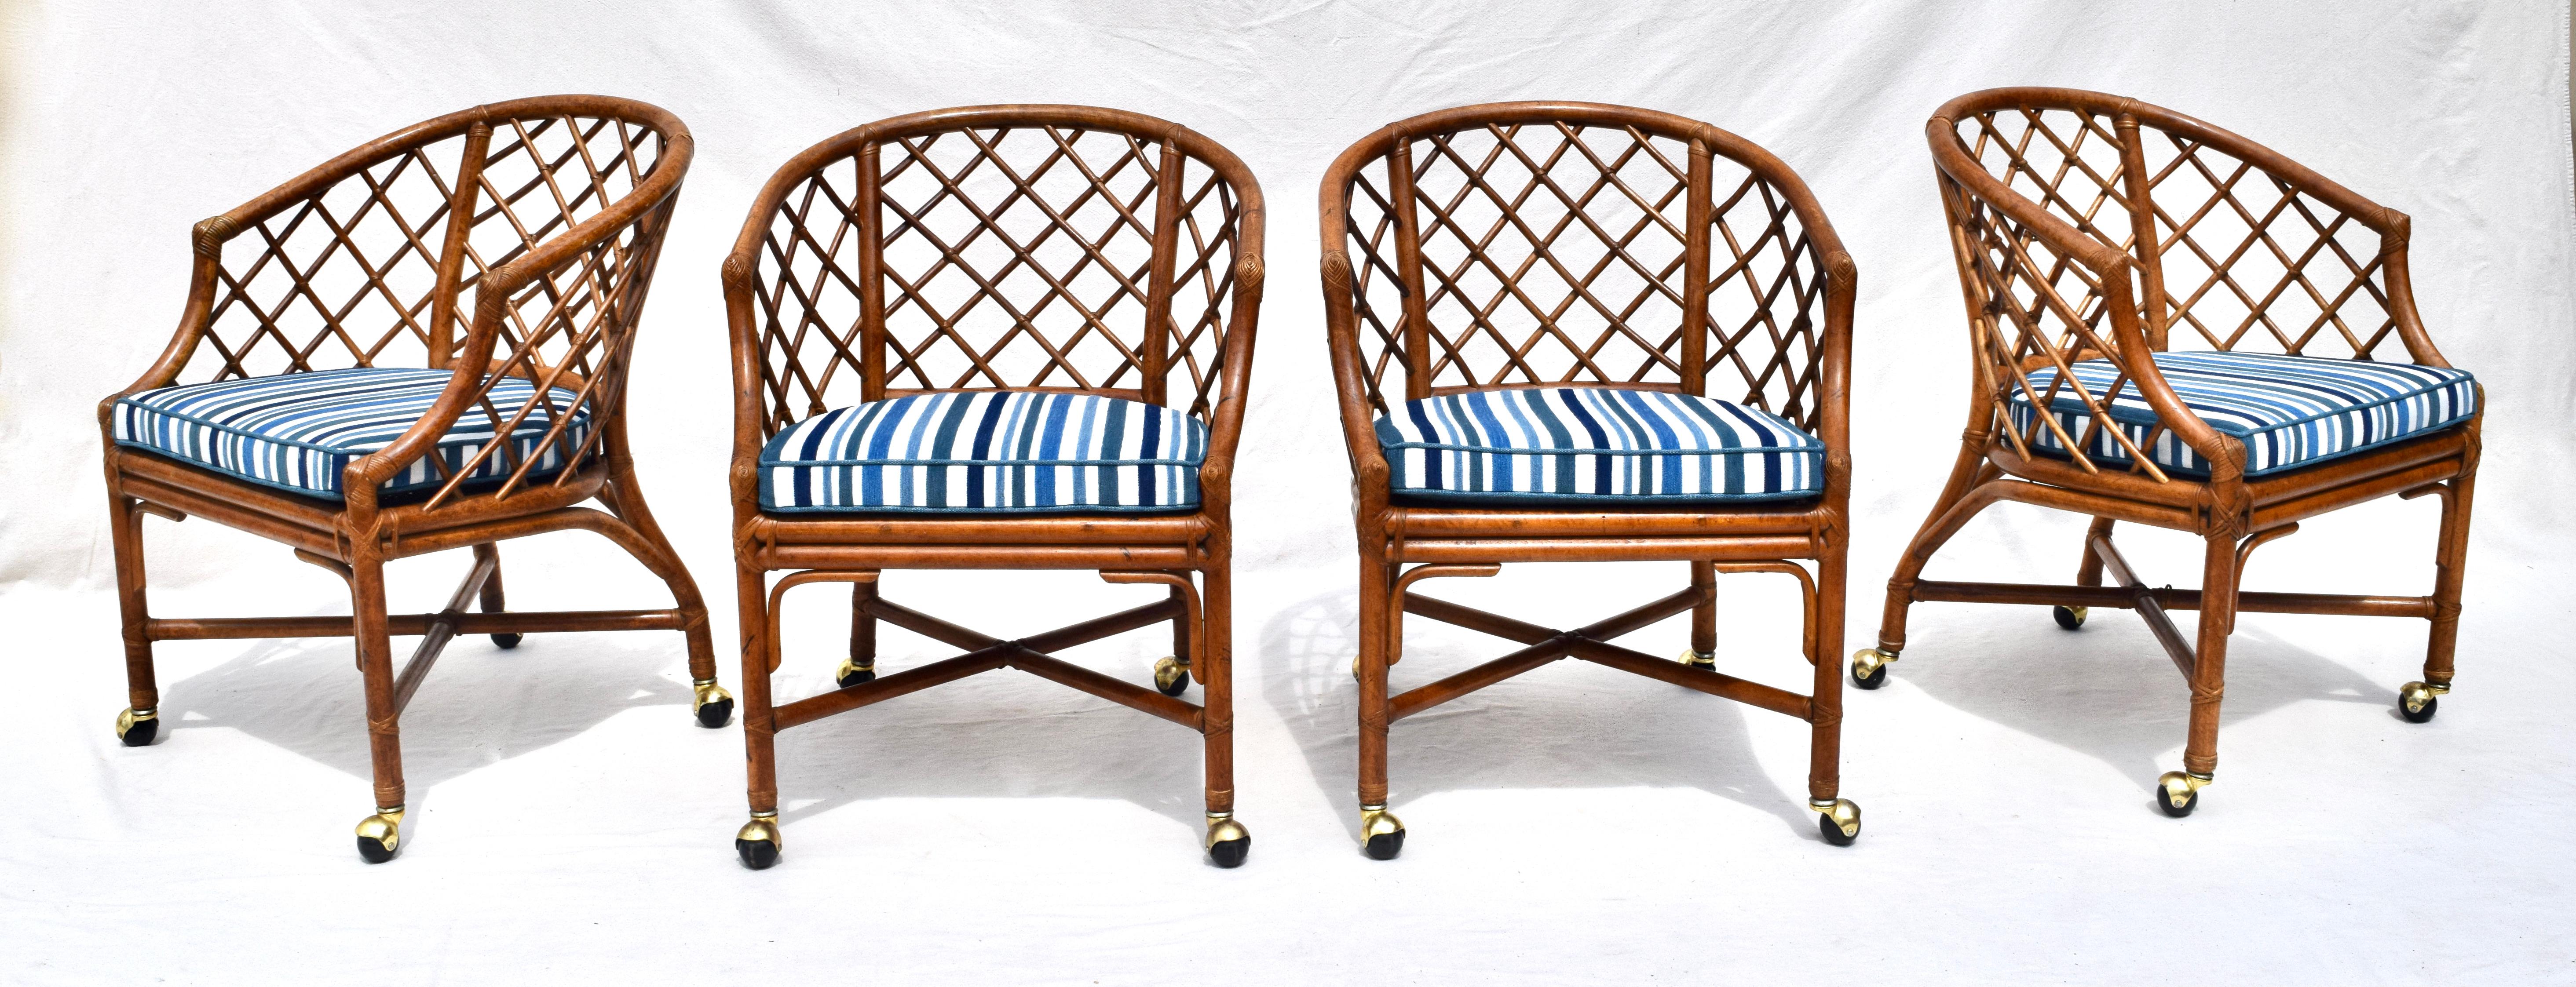 A pair of bent bamboo Chinese Chippendale barrel chairs on brass casters attributed to Ficks Reed. Lovely caned seats are enhanced with new cushions rich in various blues of chenille velvet with white and blue linen upholstery. Two pairs are